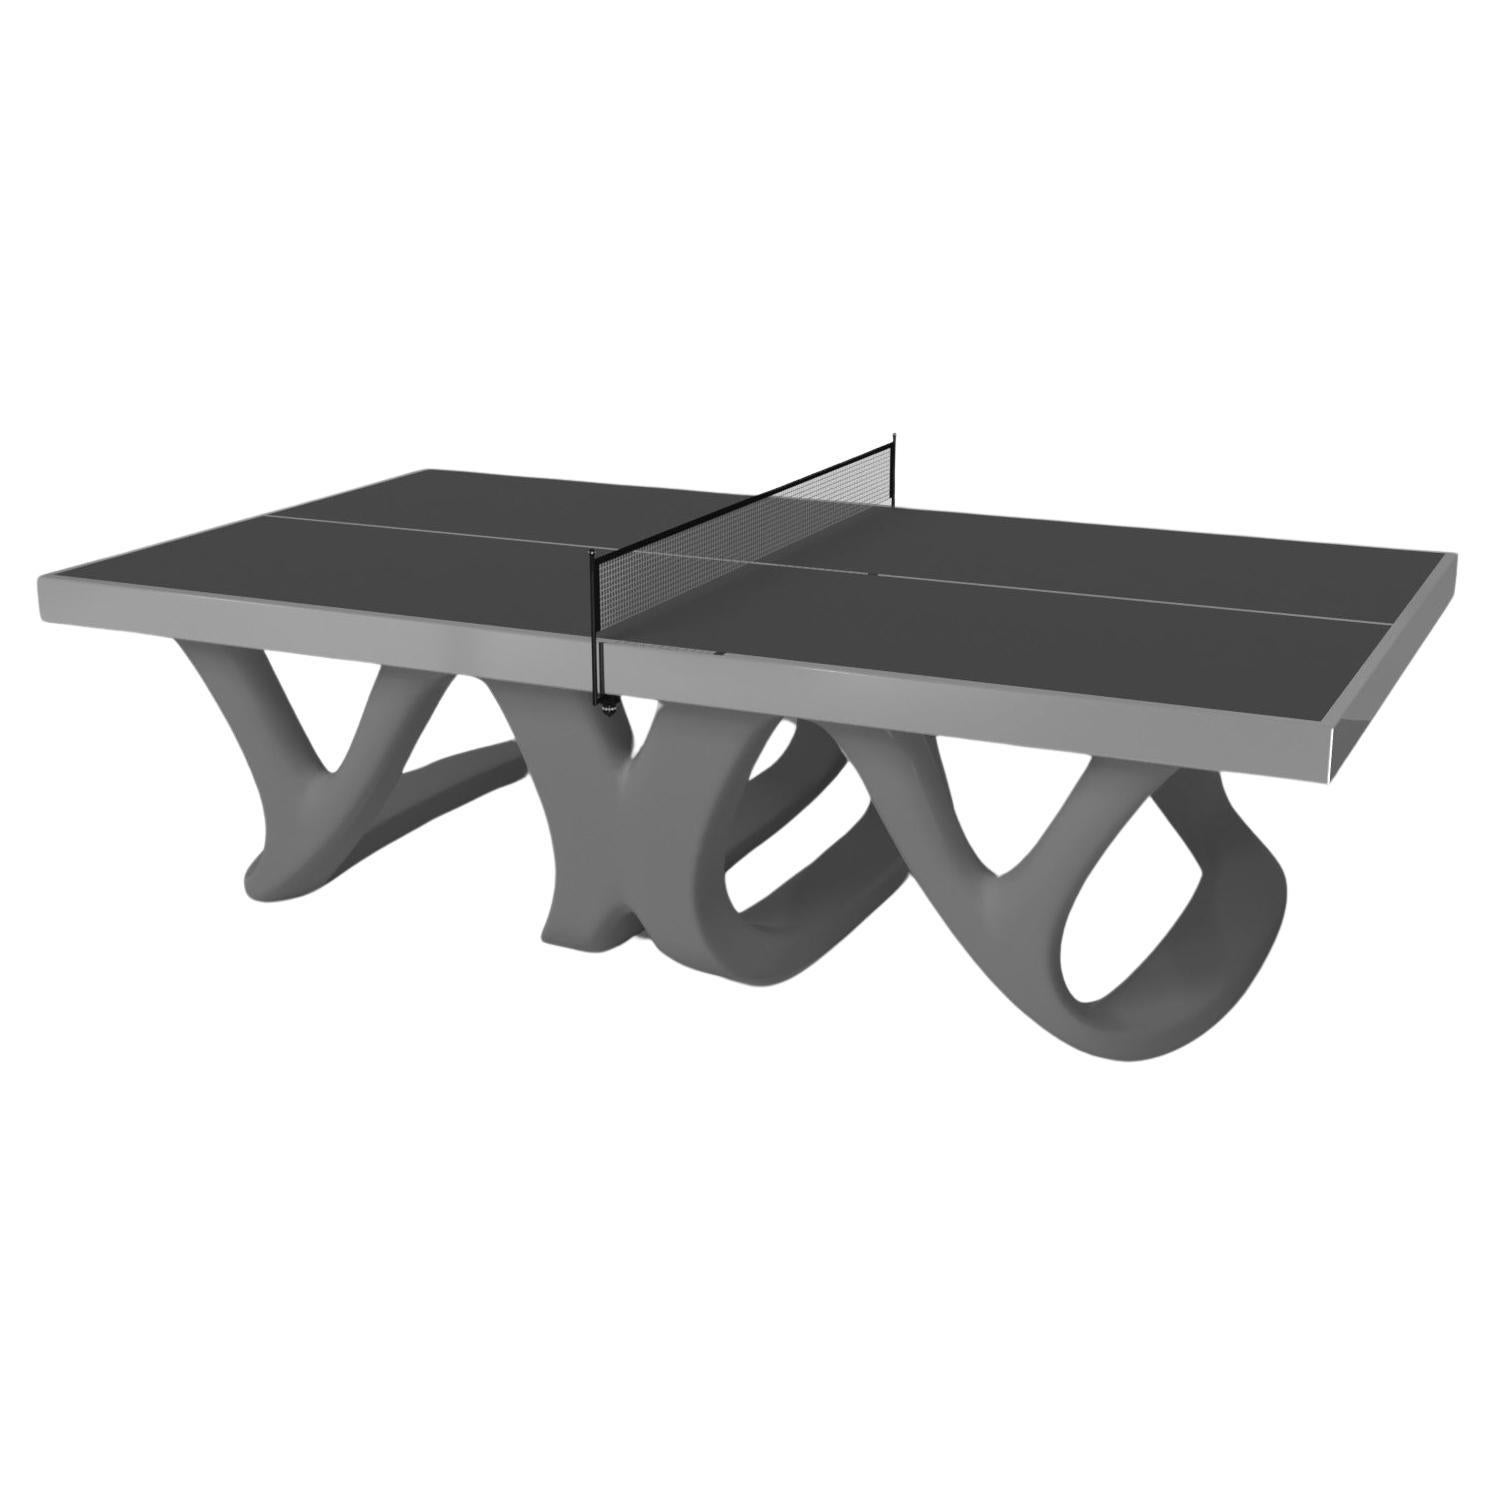 Elevate Customs Draco Tennis Table/Stainless Steel Sheet Metal in 9'-Made in USA For Sale